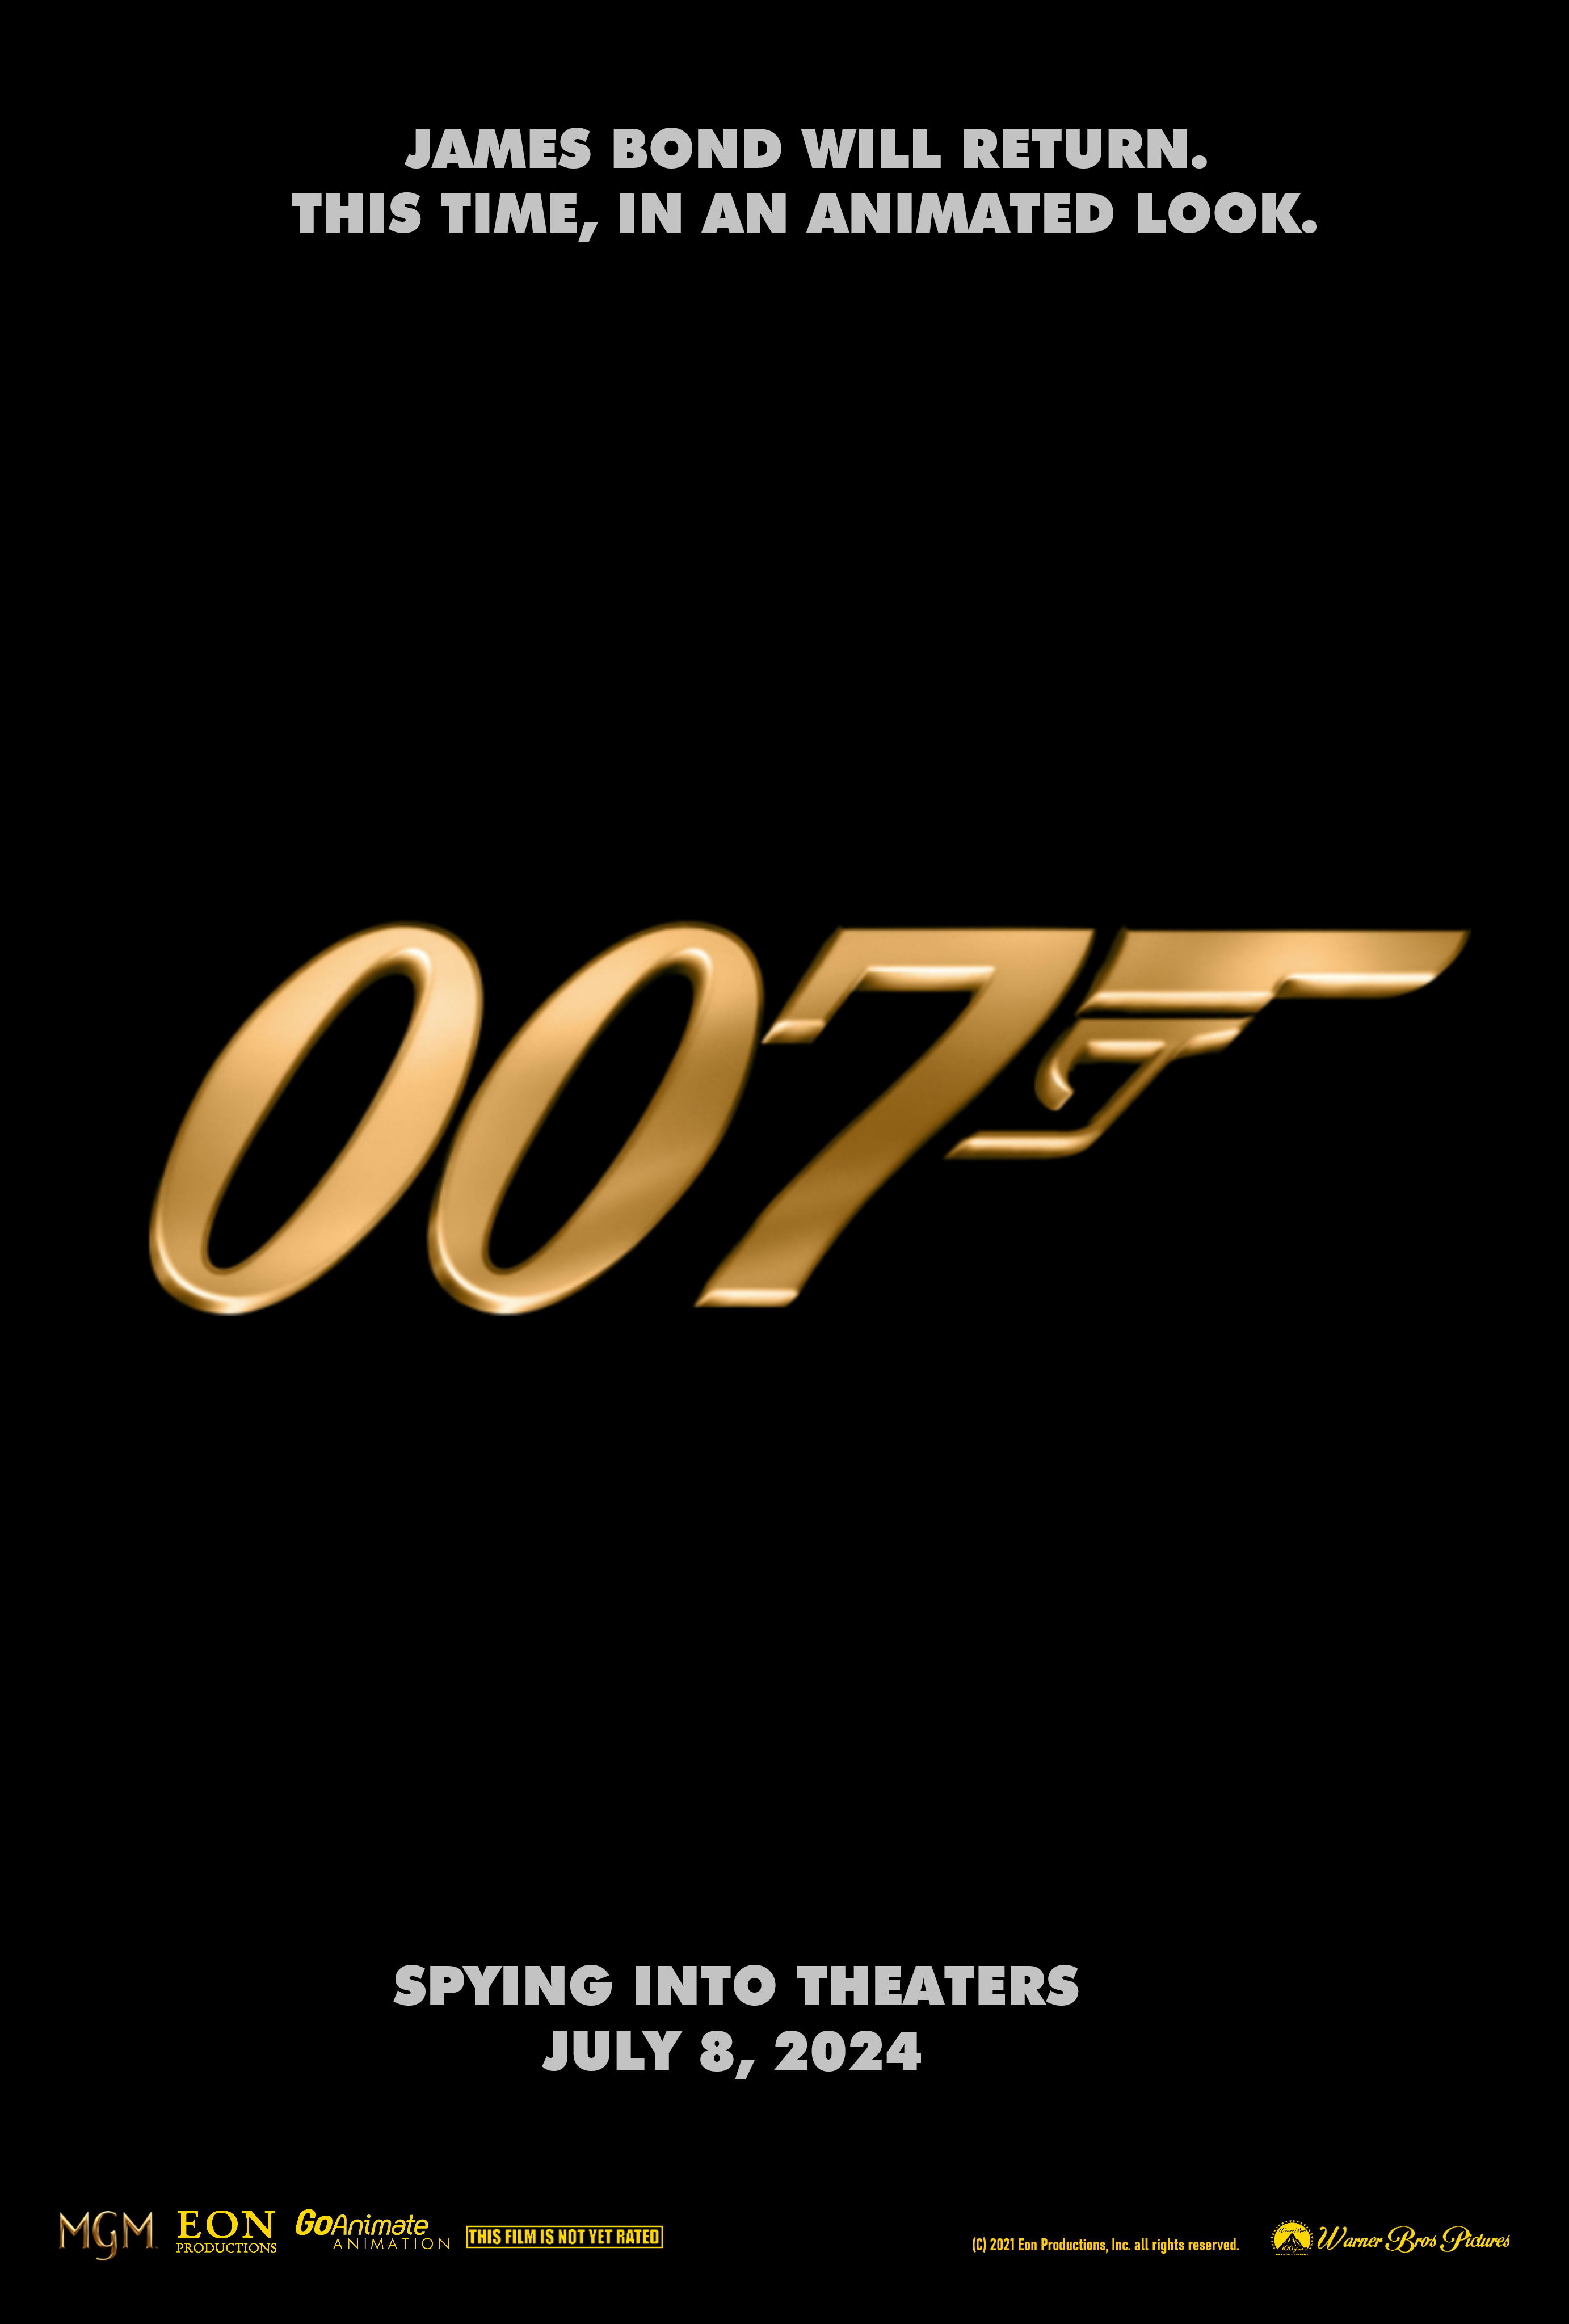 Untitled_James_Bond_animated_movie_reveal_poster.png